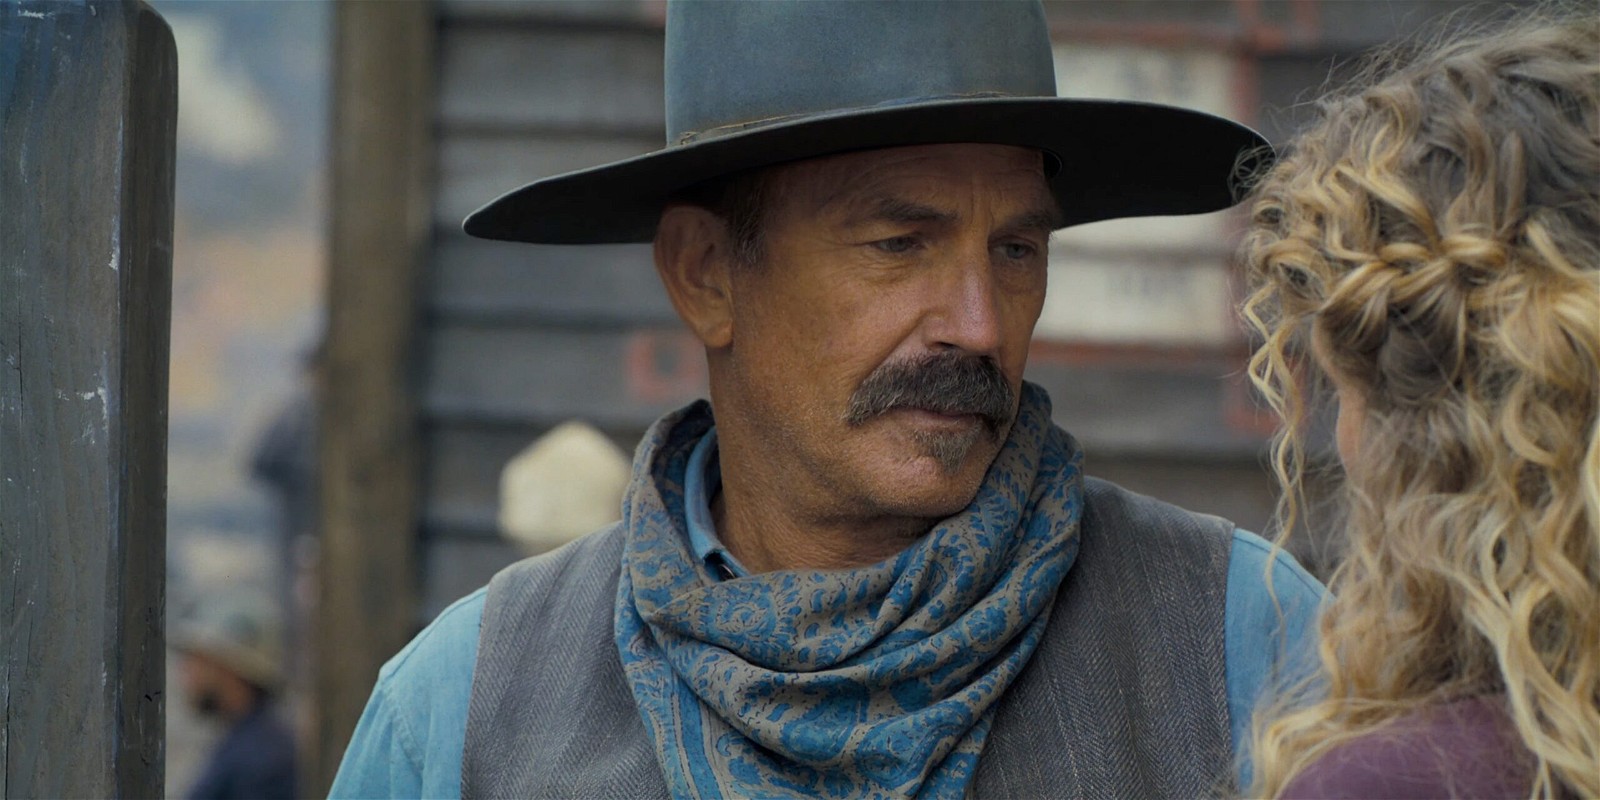 Kevin Costner in a still from the trailer of Horizon: An American Saga